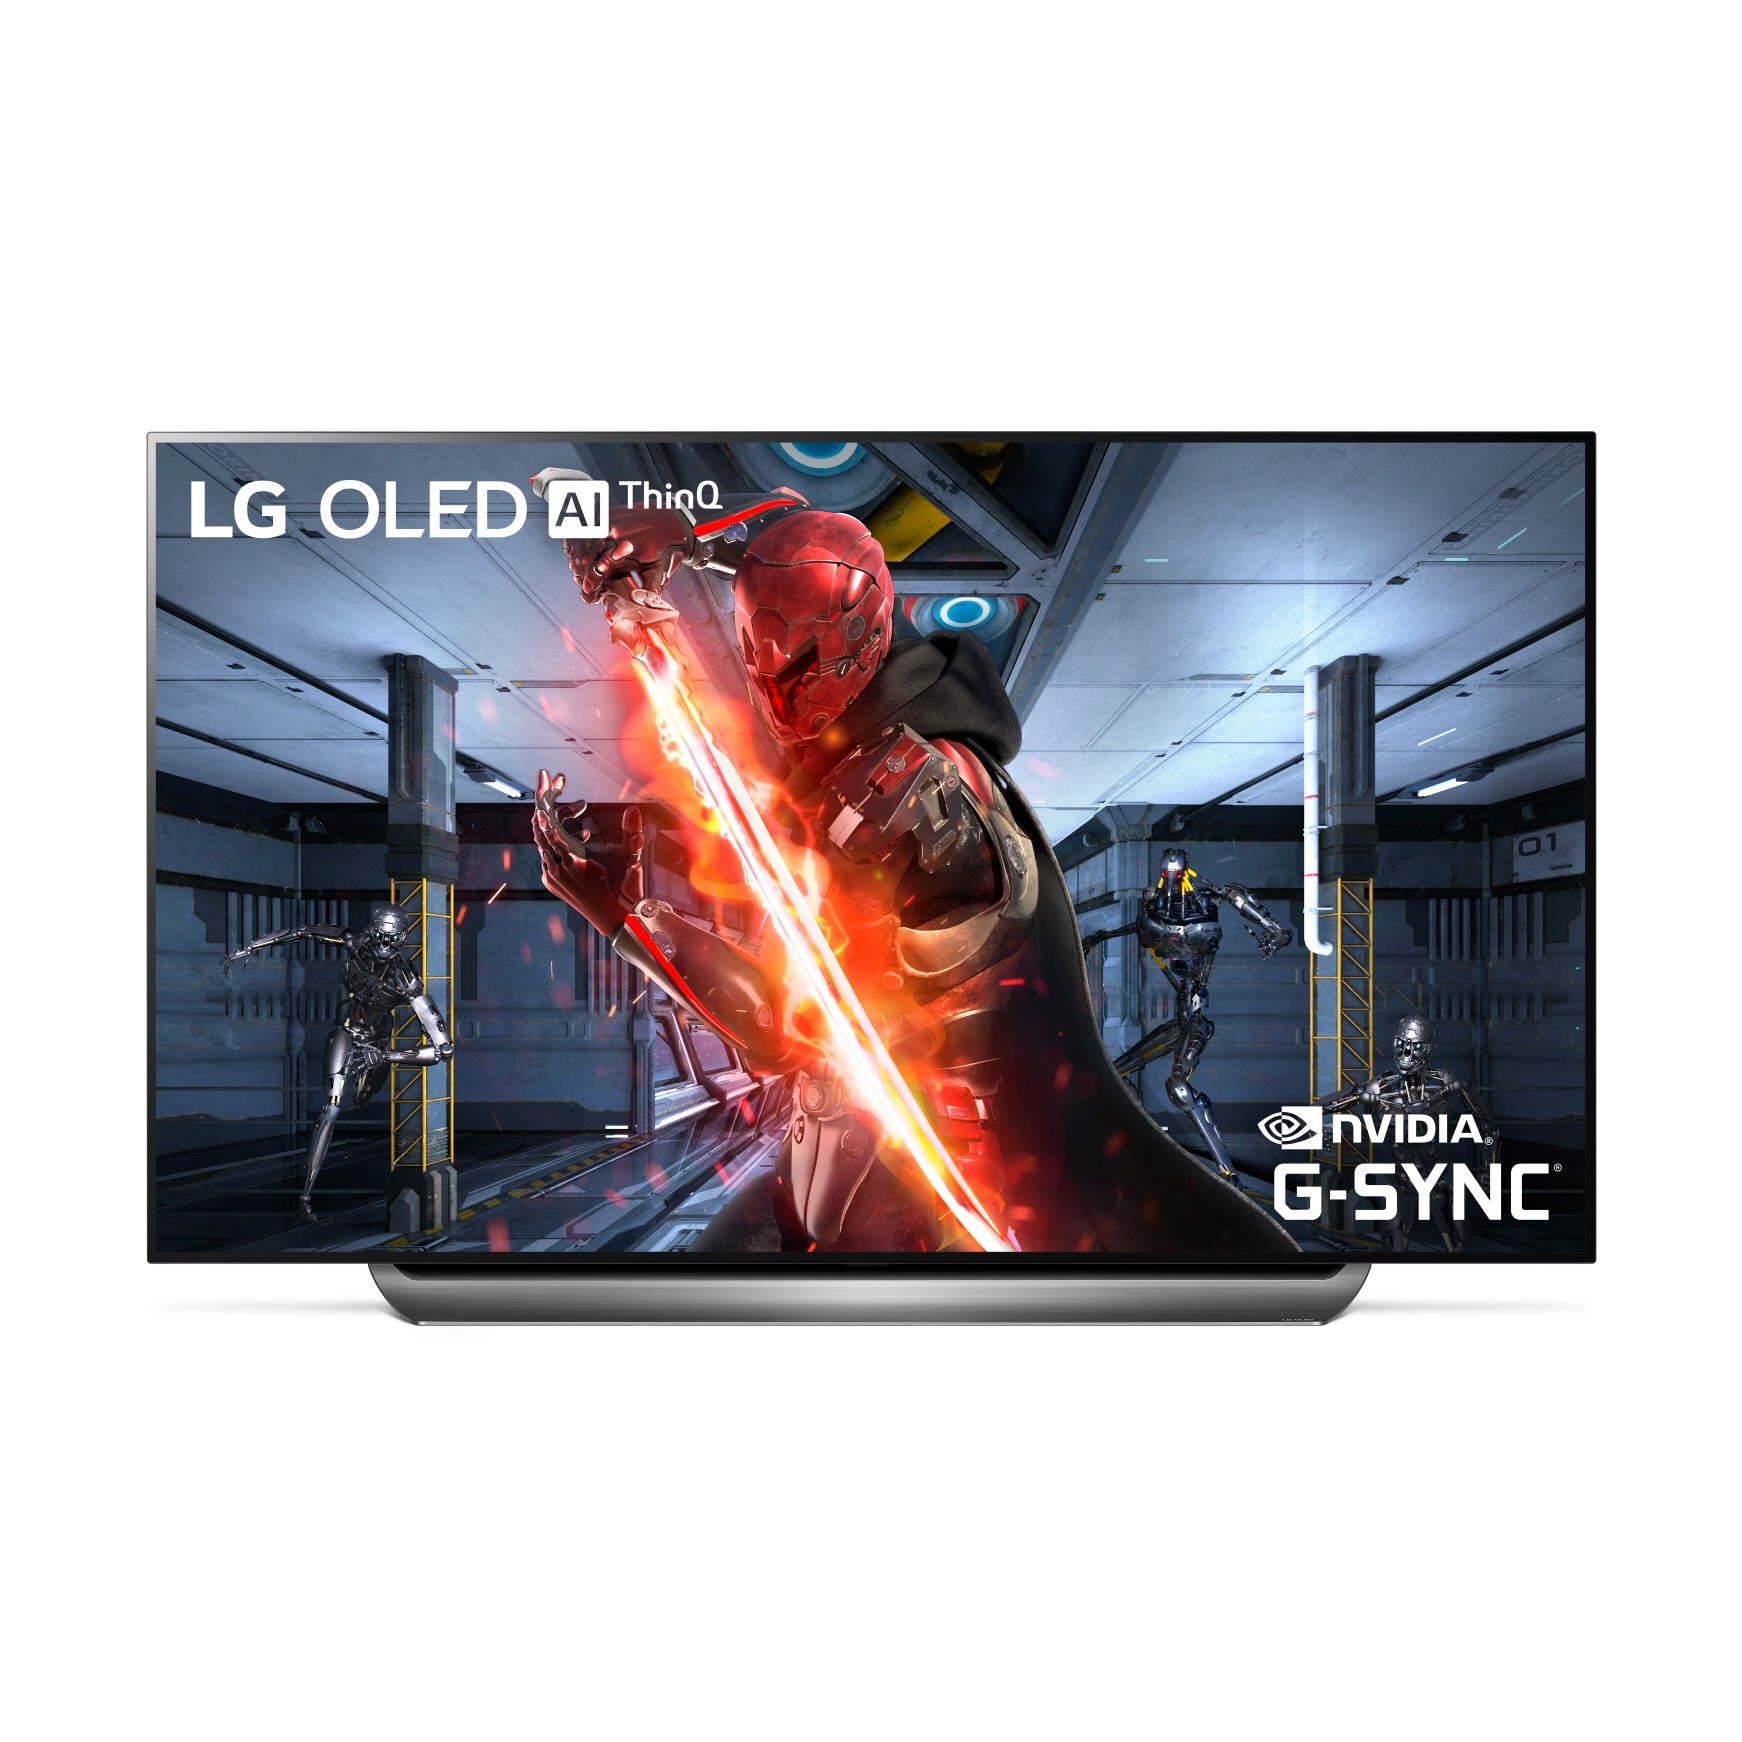 A front view of LG OLED TV with NVIDIA G-SYNC